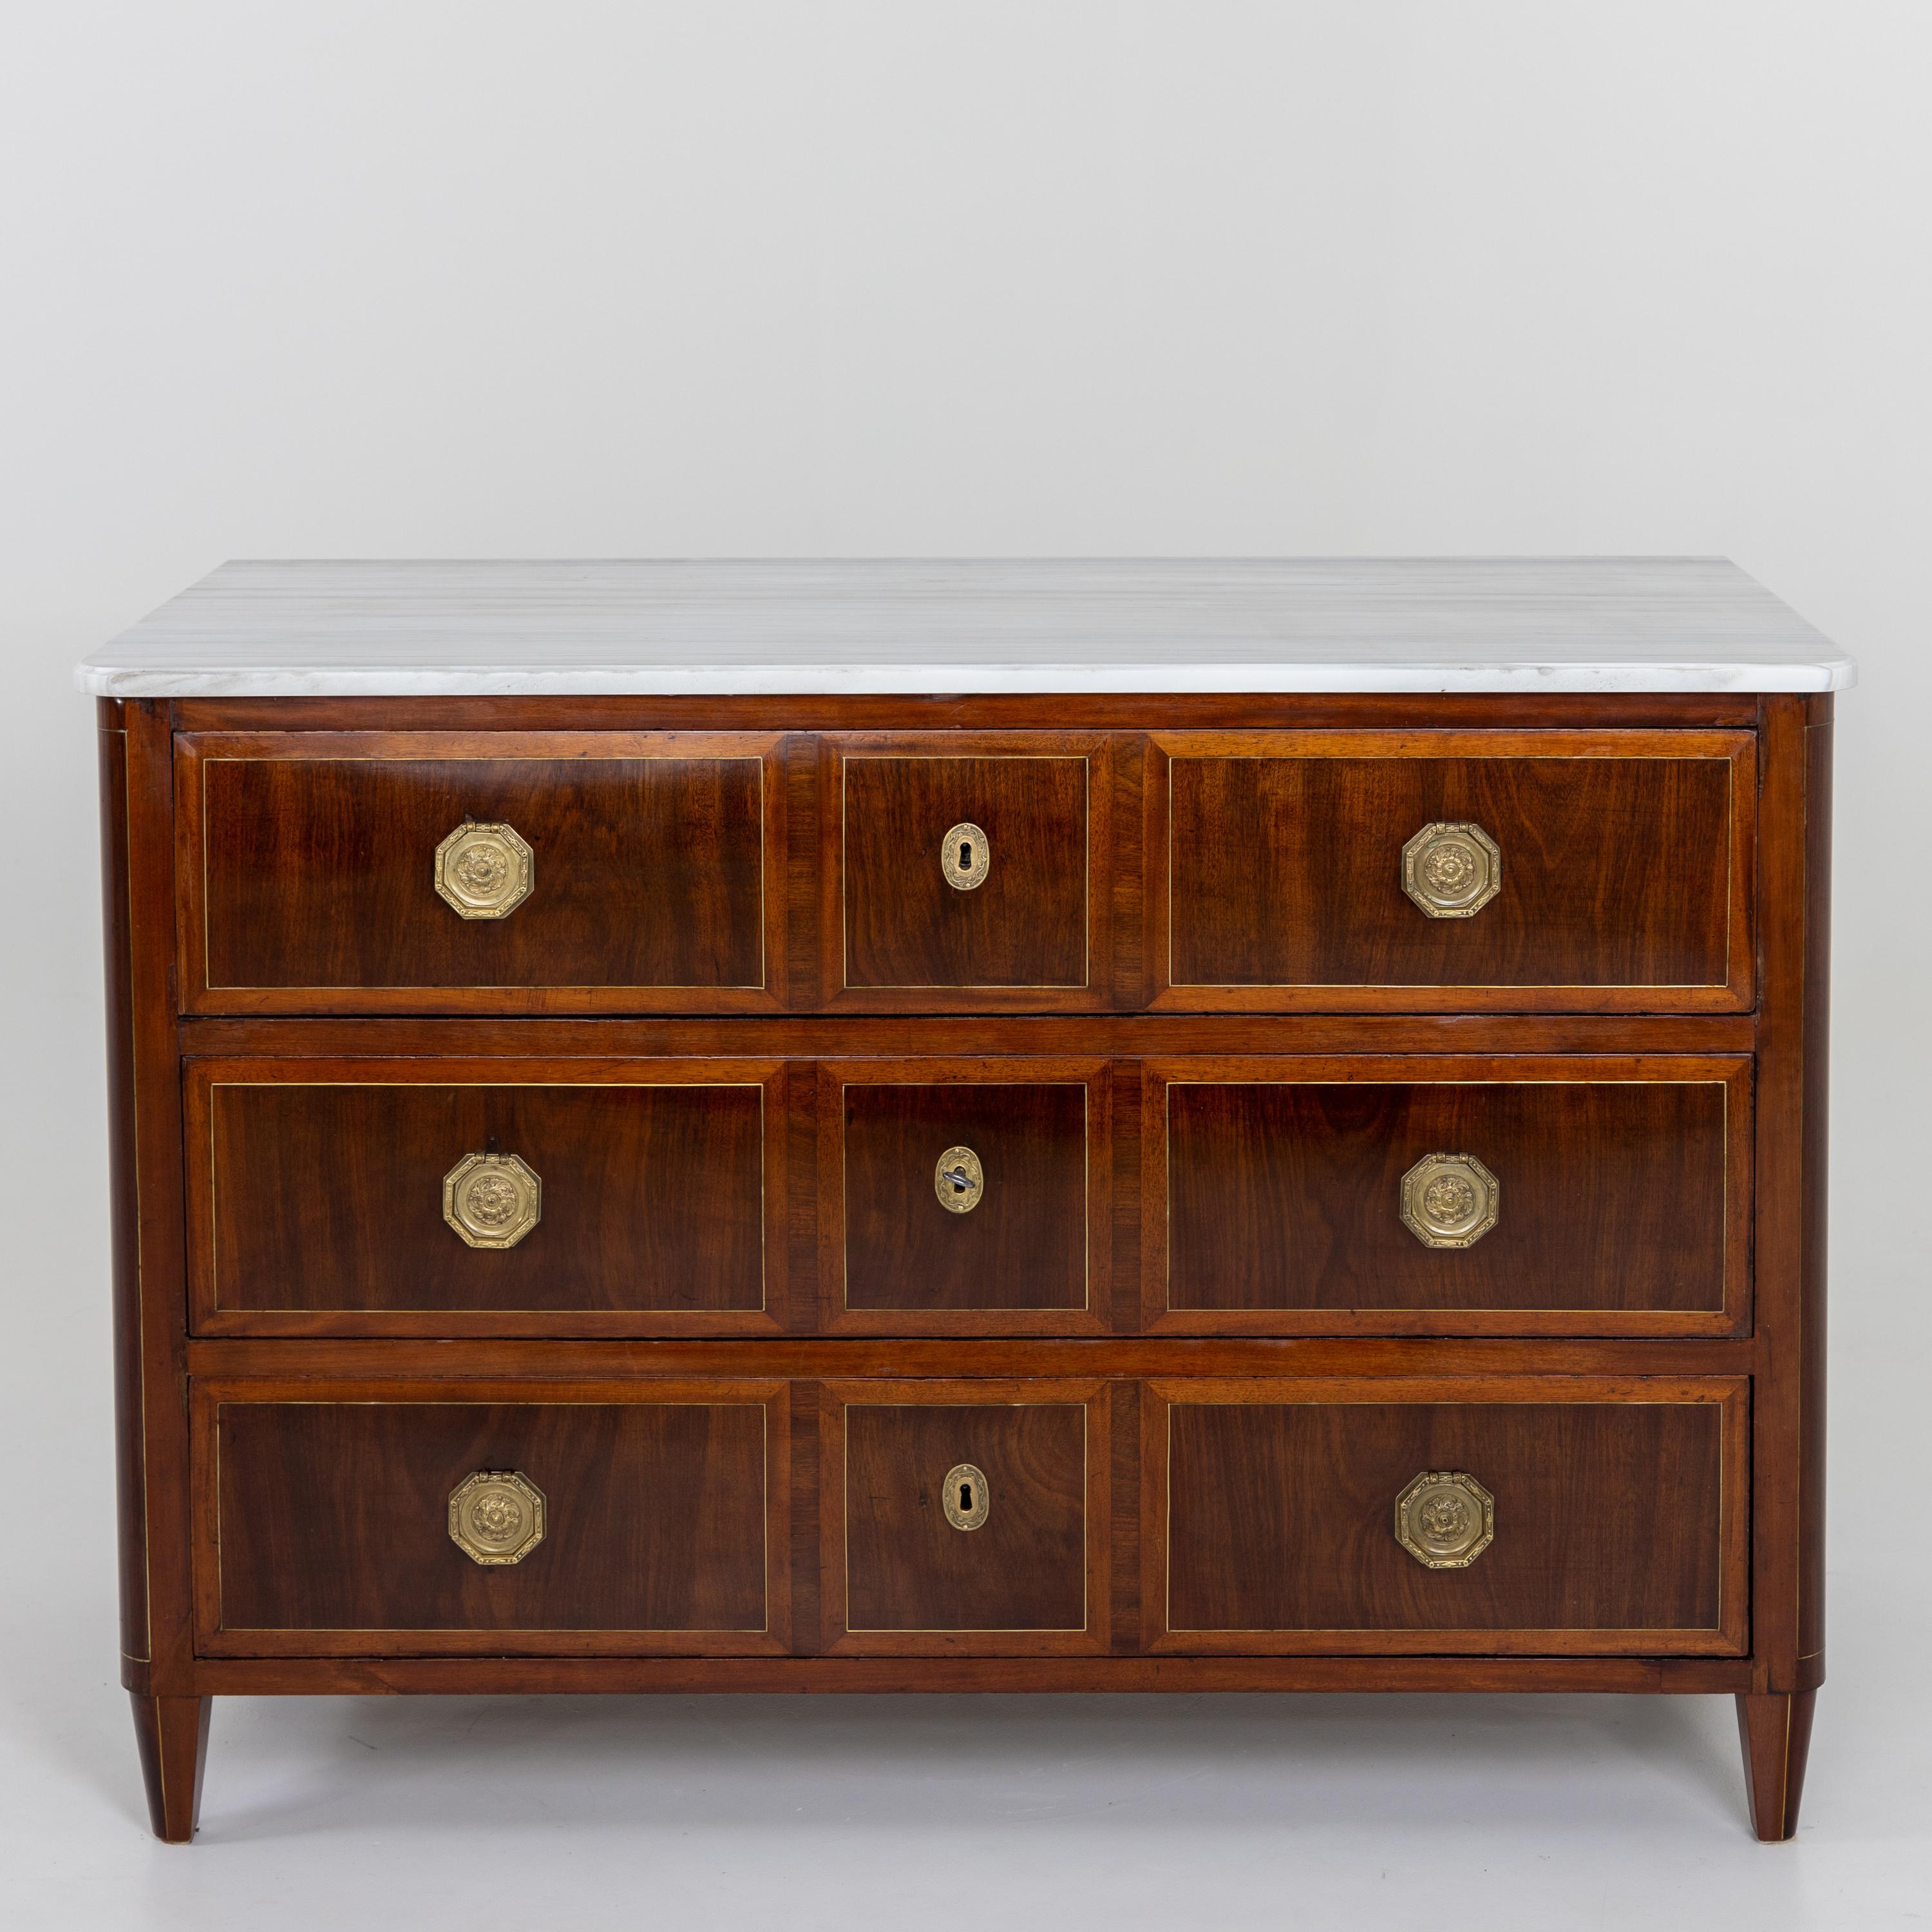 Neoclassical Chest of Drawers with white Marble Top, Late 18th Century For Sale 4